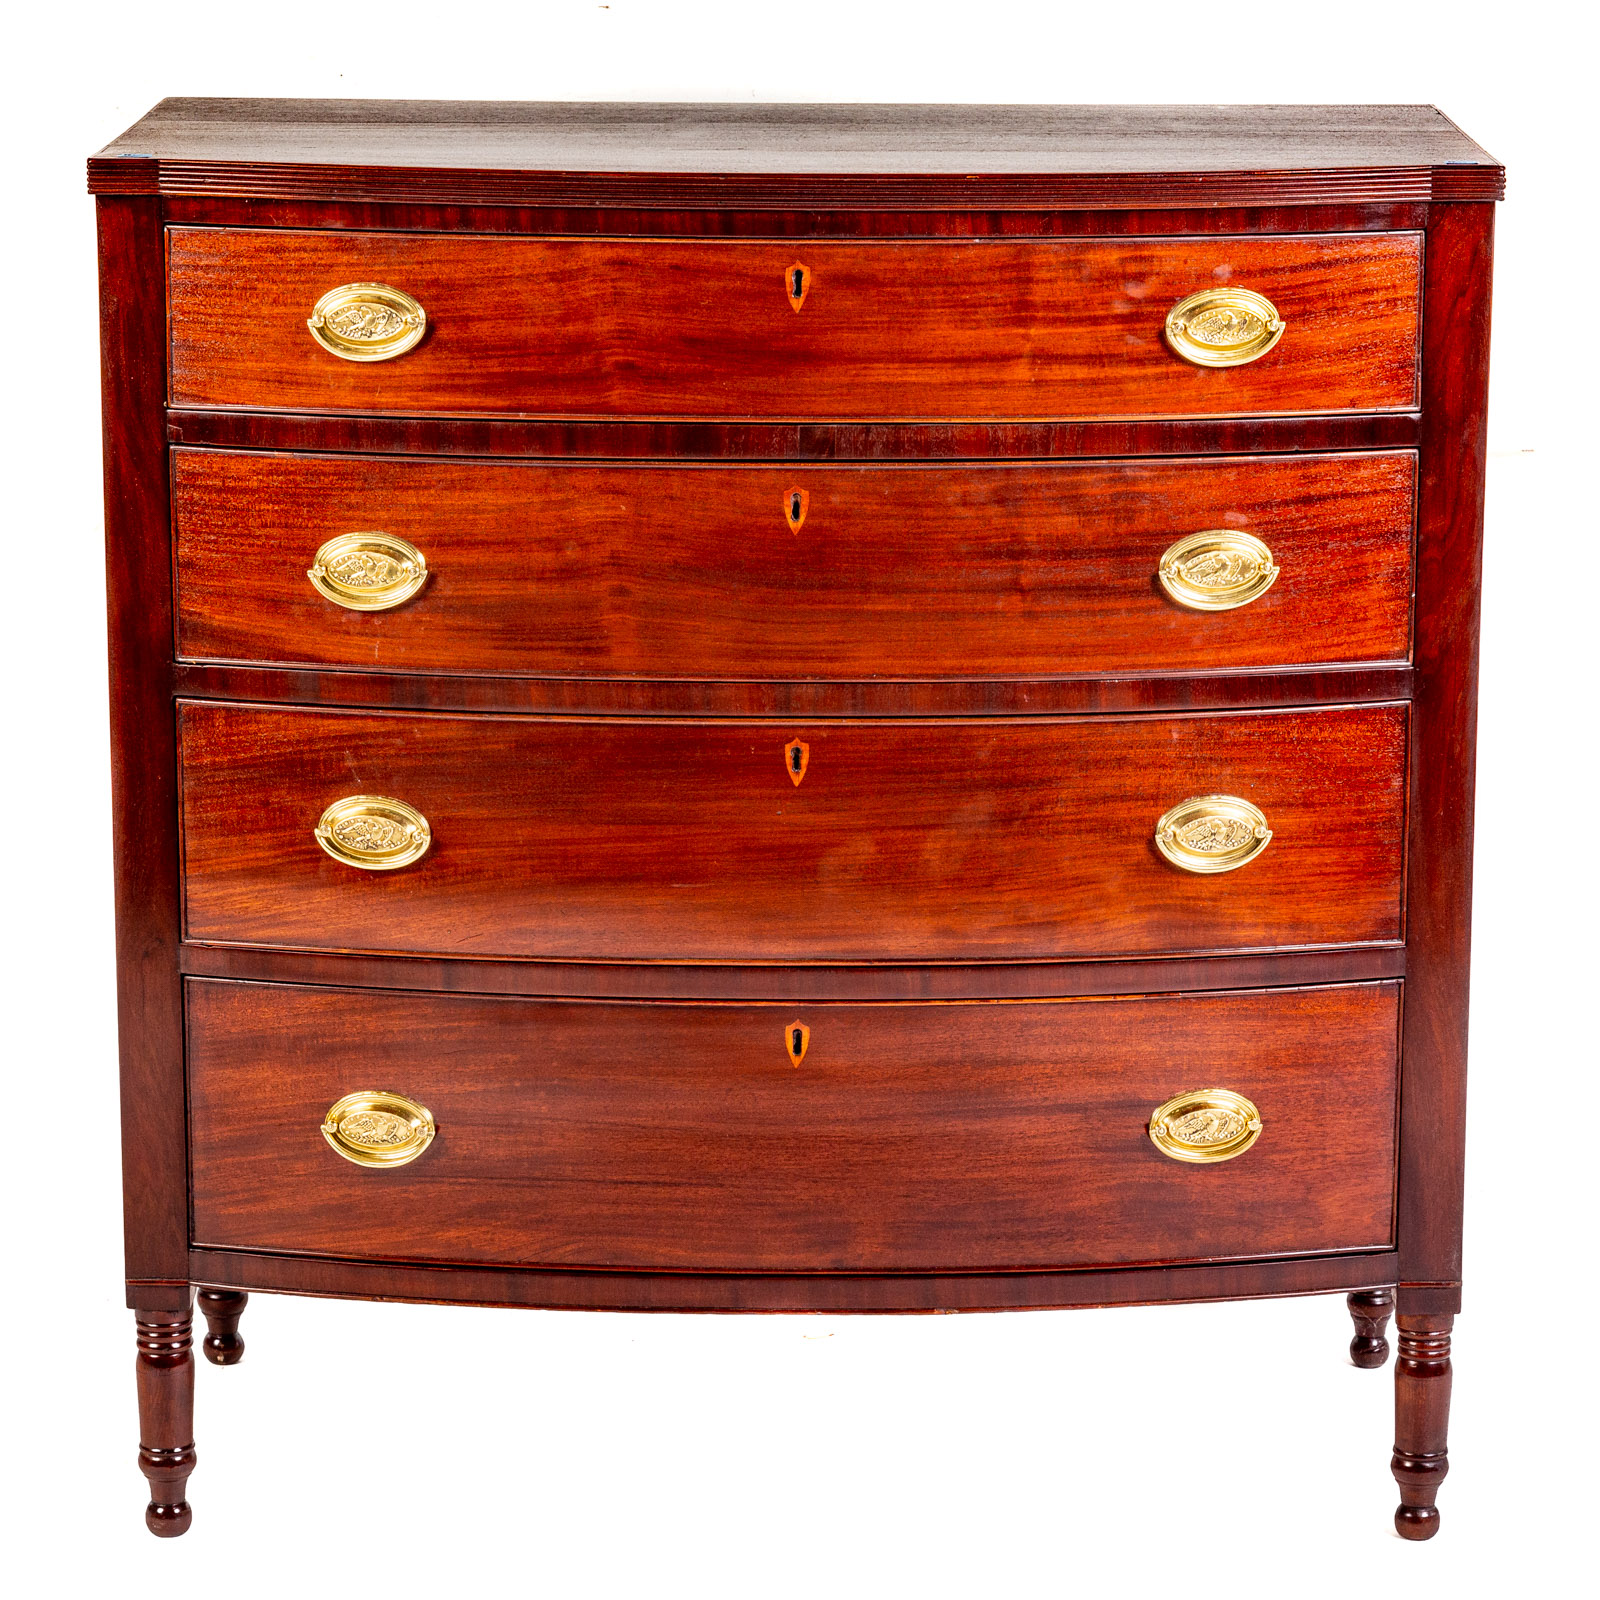 FEDERAL MAHOGANY BOWFRONT CHEST 29e8f7